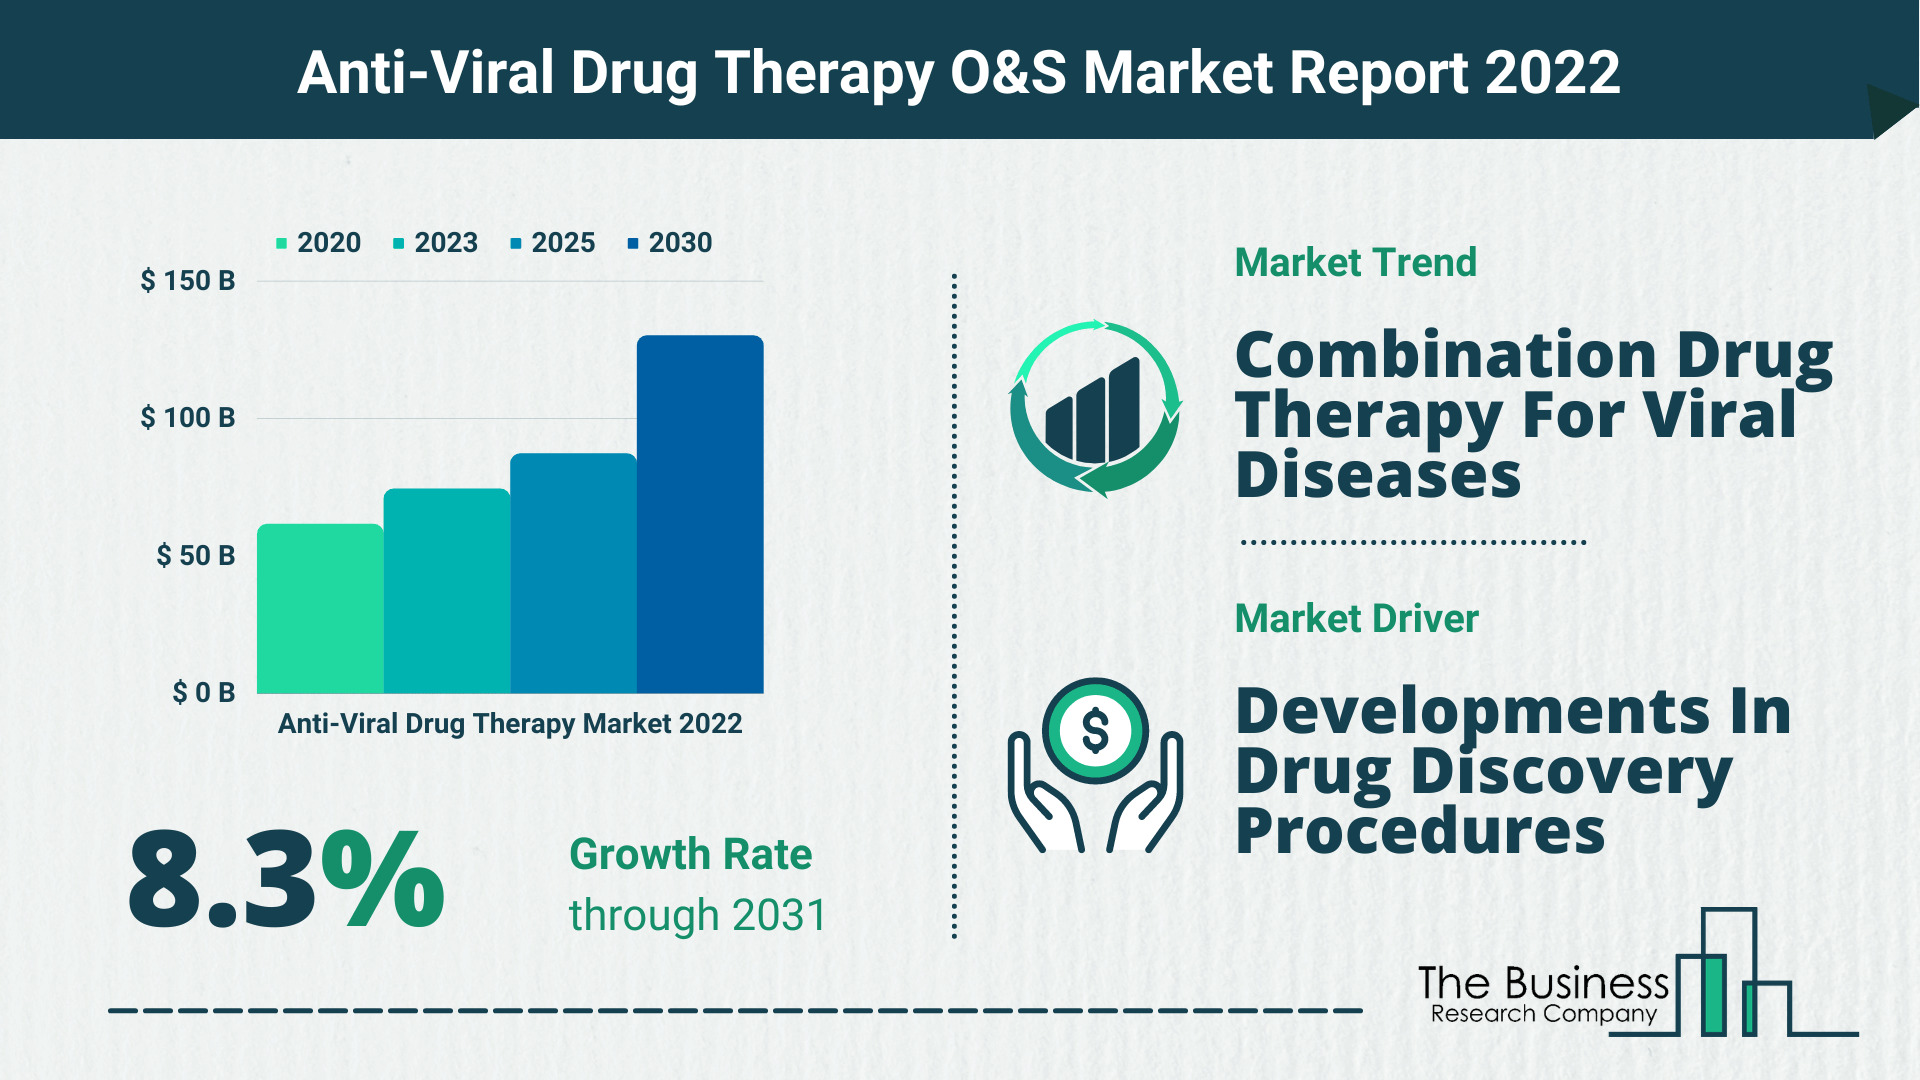 Anti-Viral Drug Therapy Market Growth Analysis Till 2030 By The Business Research Company